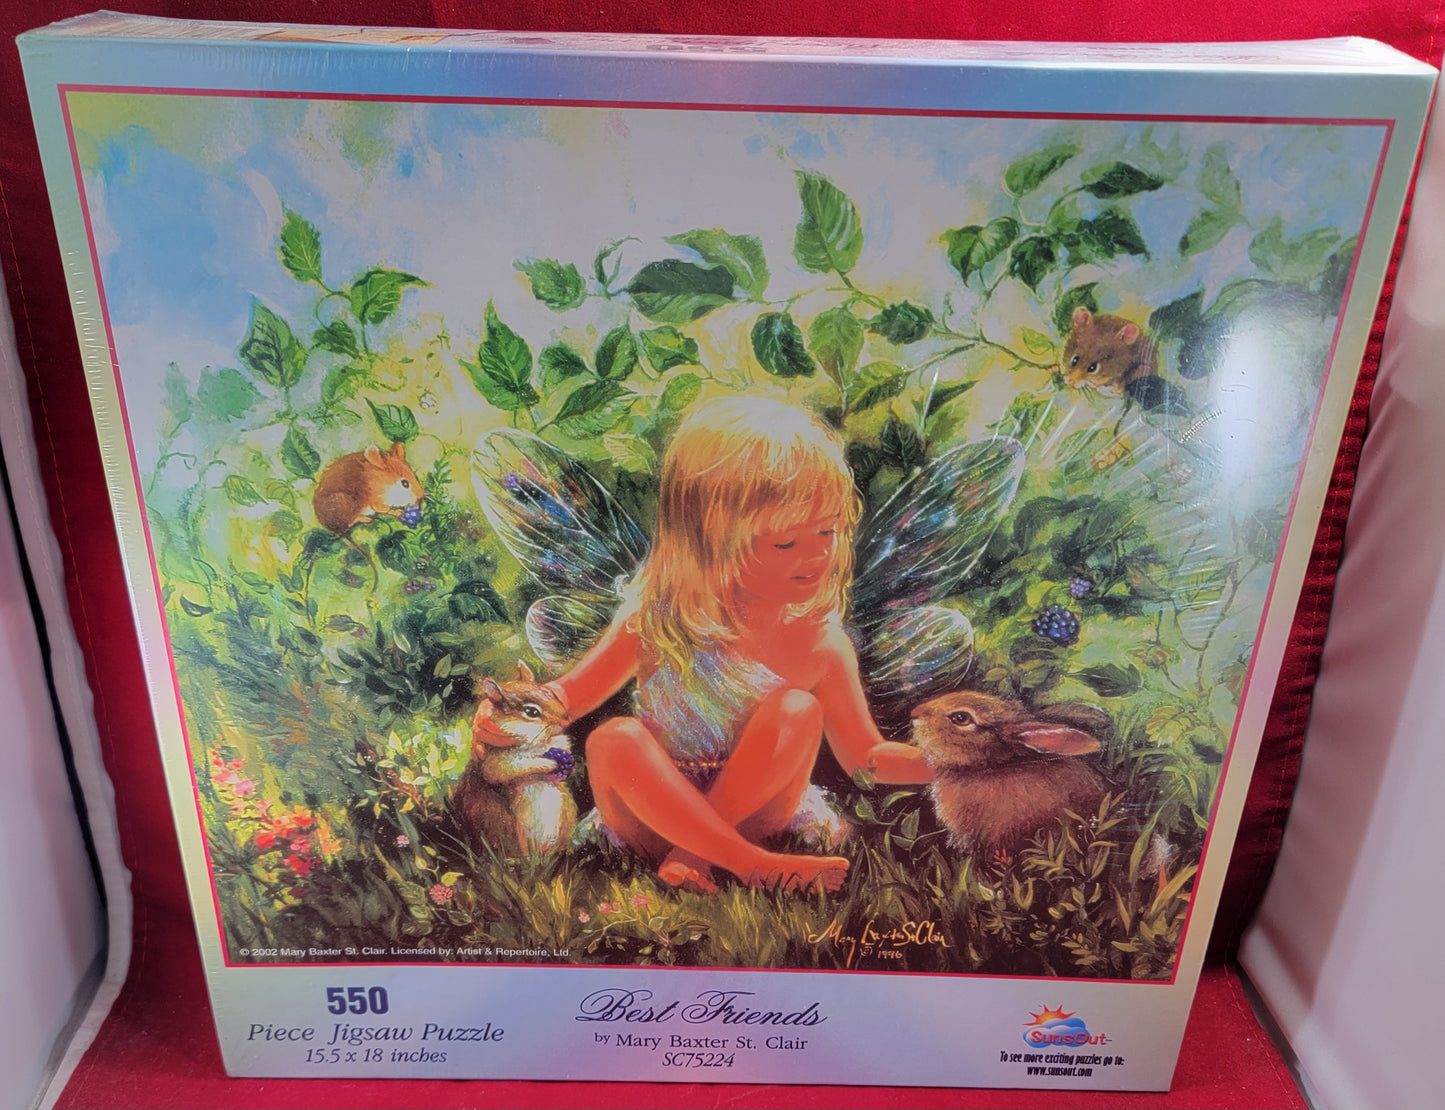 Best friends 550 piece 2002 puzzle (nib)
brand new sunsout 550 piece jigsaw puzzle by Mary Baxter st. Clair 1996. puzzle has a little fairy girl surrounded by natures pets sitting in the grass. item is brand new and sealed.